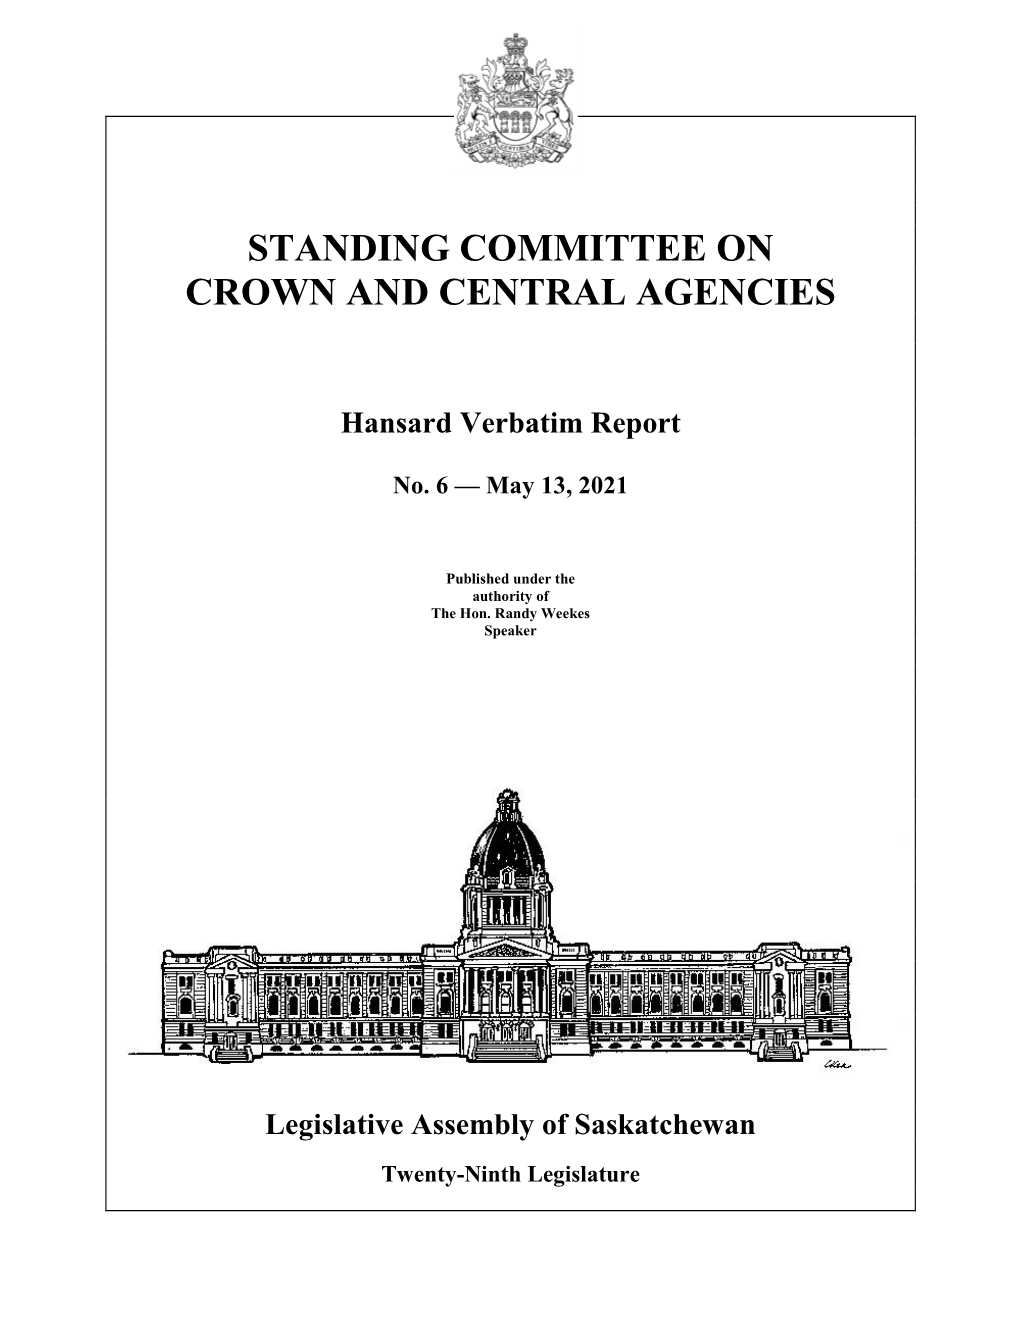 May 13, 2021 Crown and Central Agencies Committee